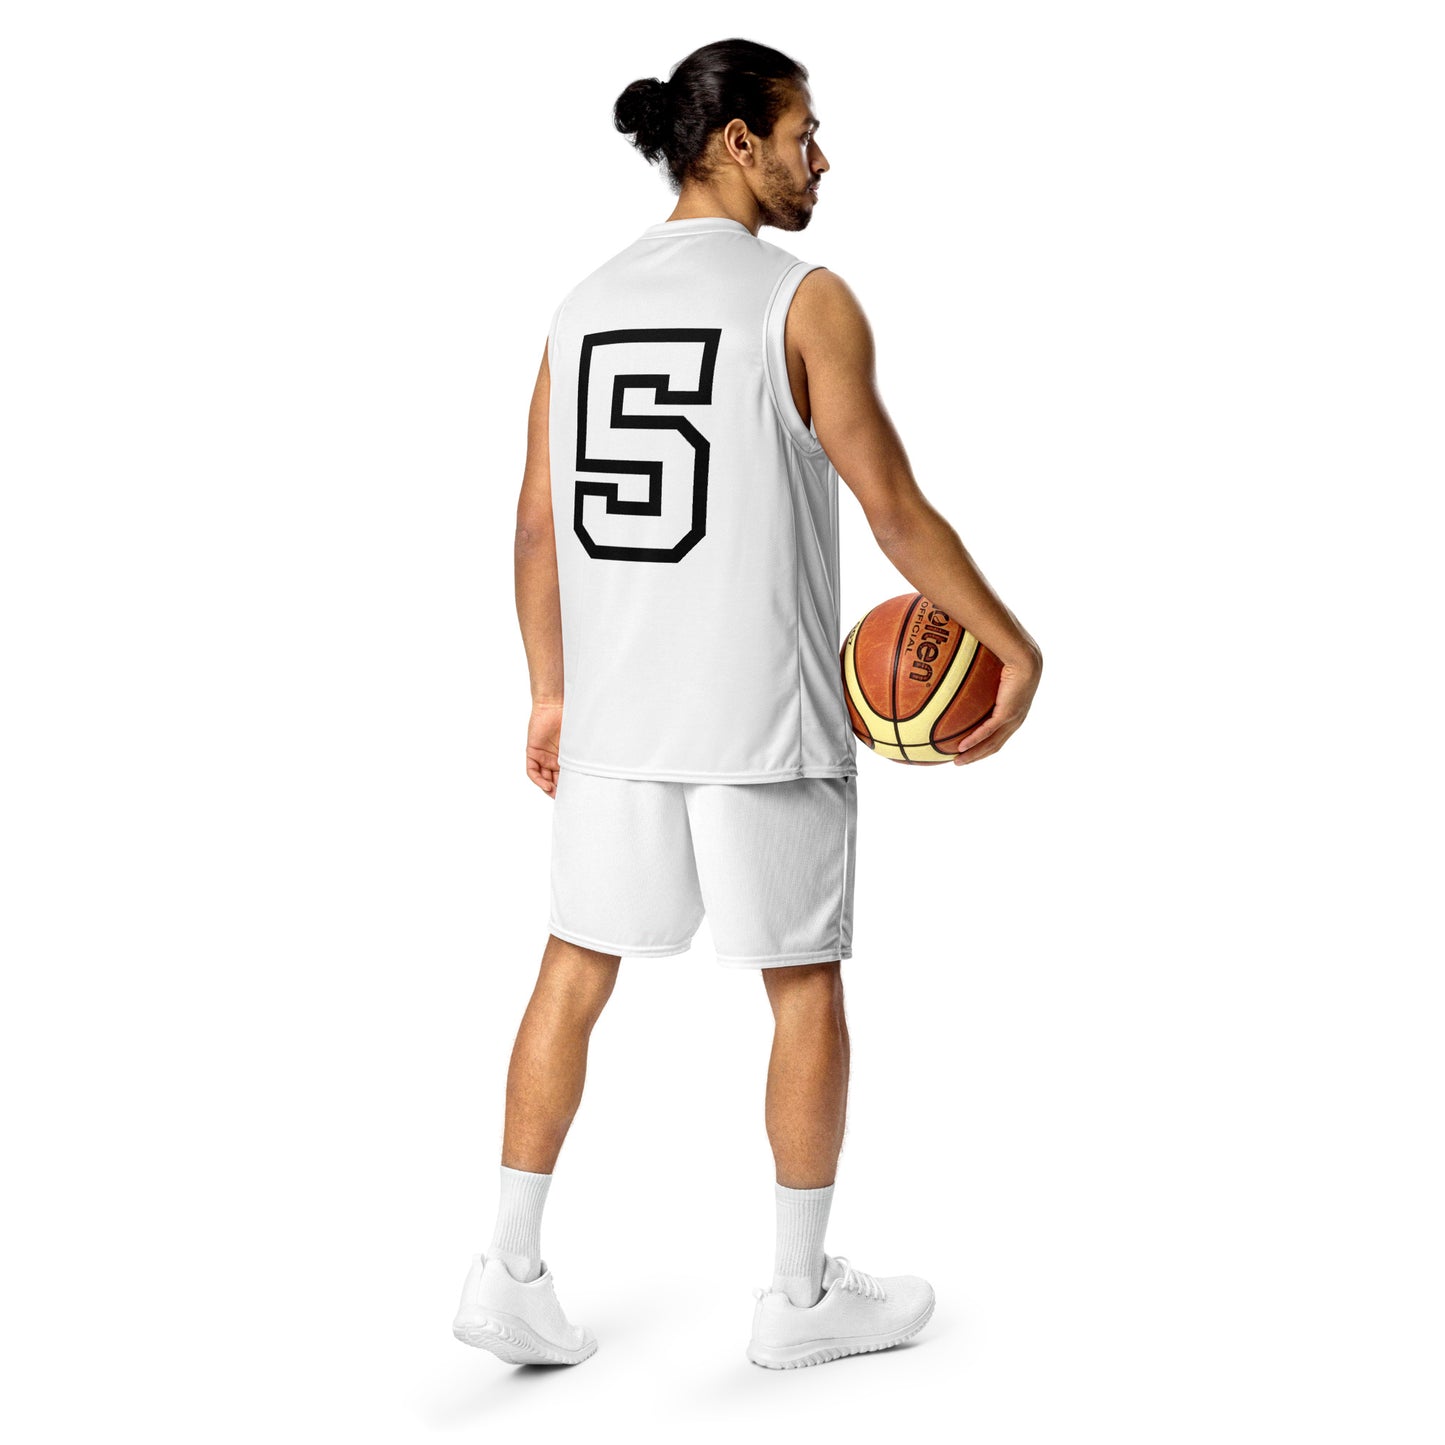 WSF (v6) Recycled unisex basketball jersey